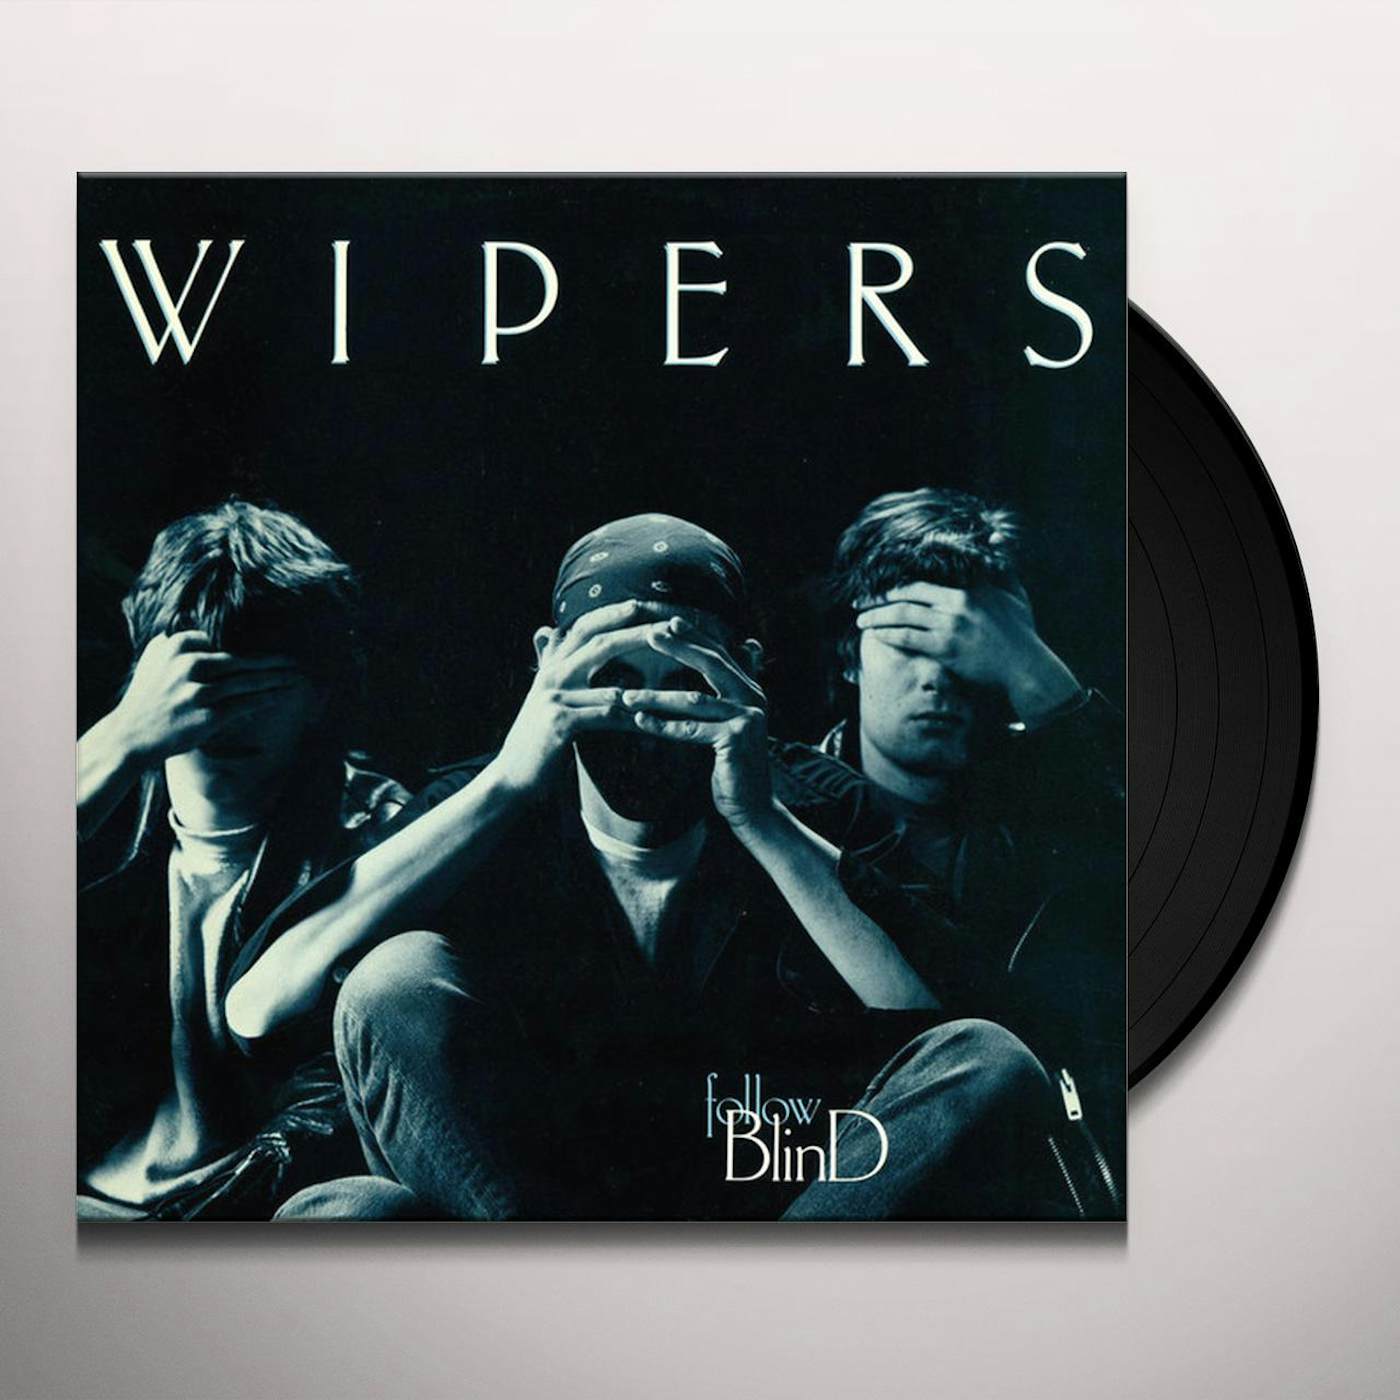 Wipers Follow Blind (180G) Vinyl Record